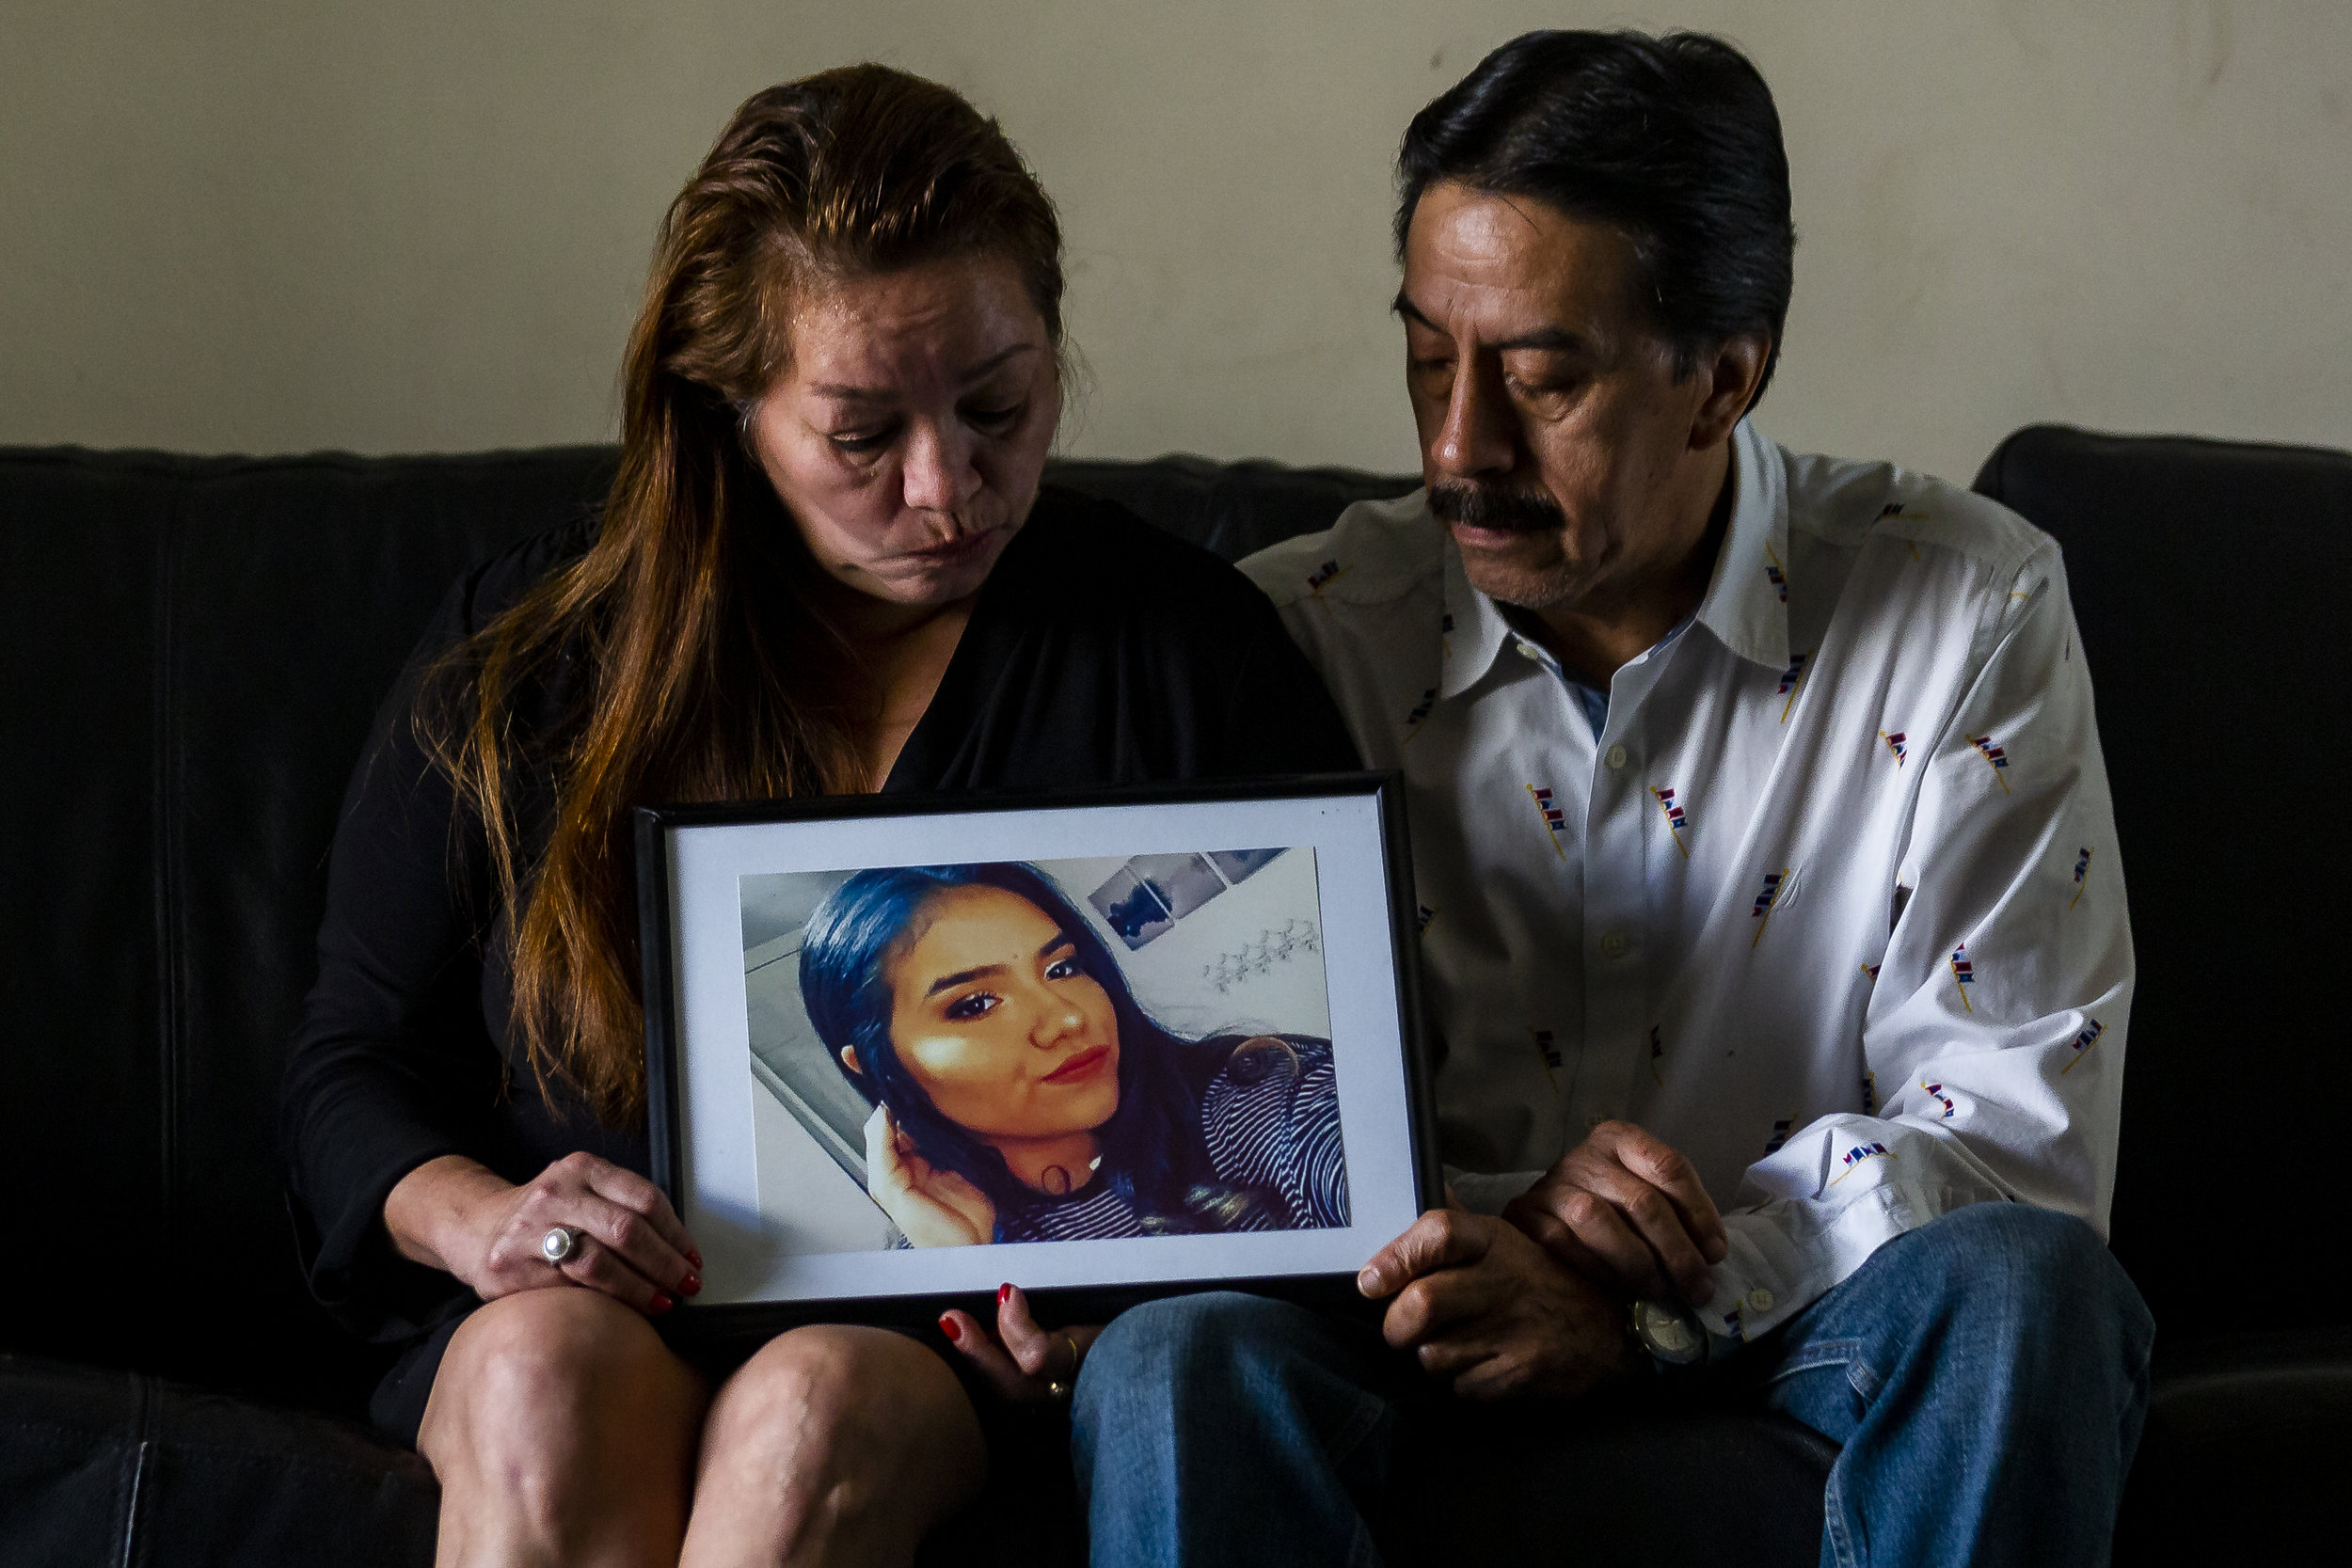  Gina Duran, left, and her husband, Orlando Duran, look at a photo of their daughter Alexa Duran at their home in Miami, Florida on Sunday, December 23, 2018. Alexa Duran, 18, was driving her father's car the day the FIU bridge collapsed. She was one